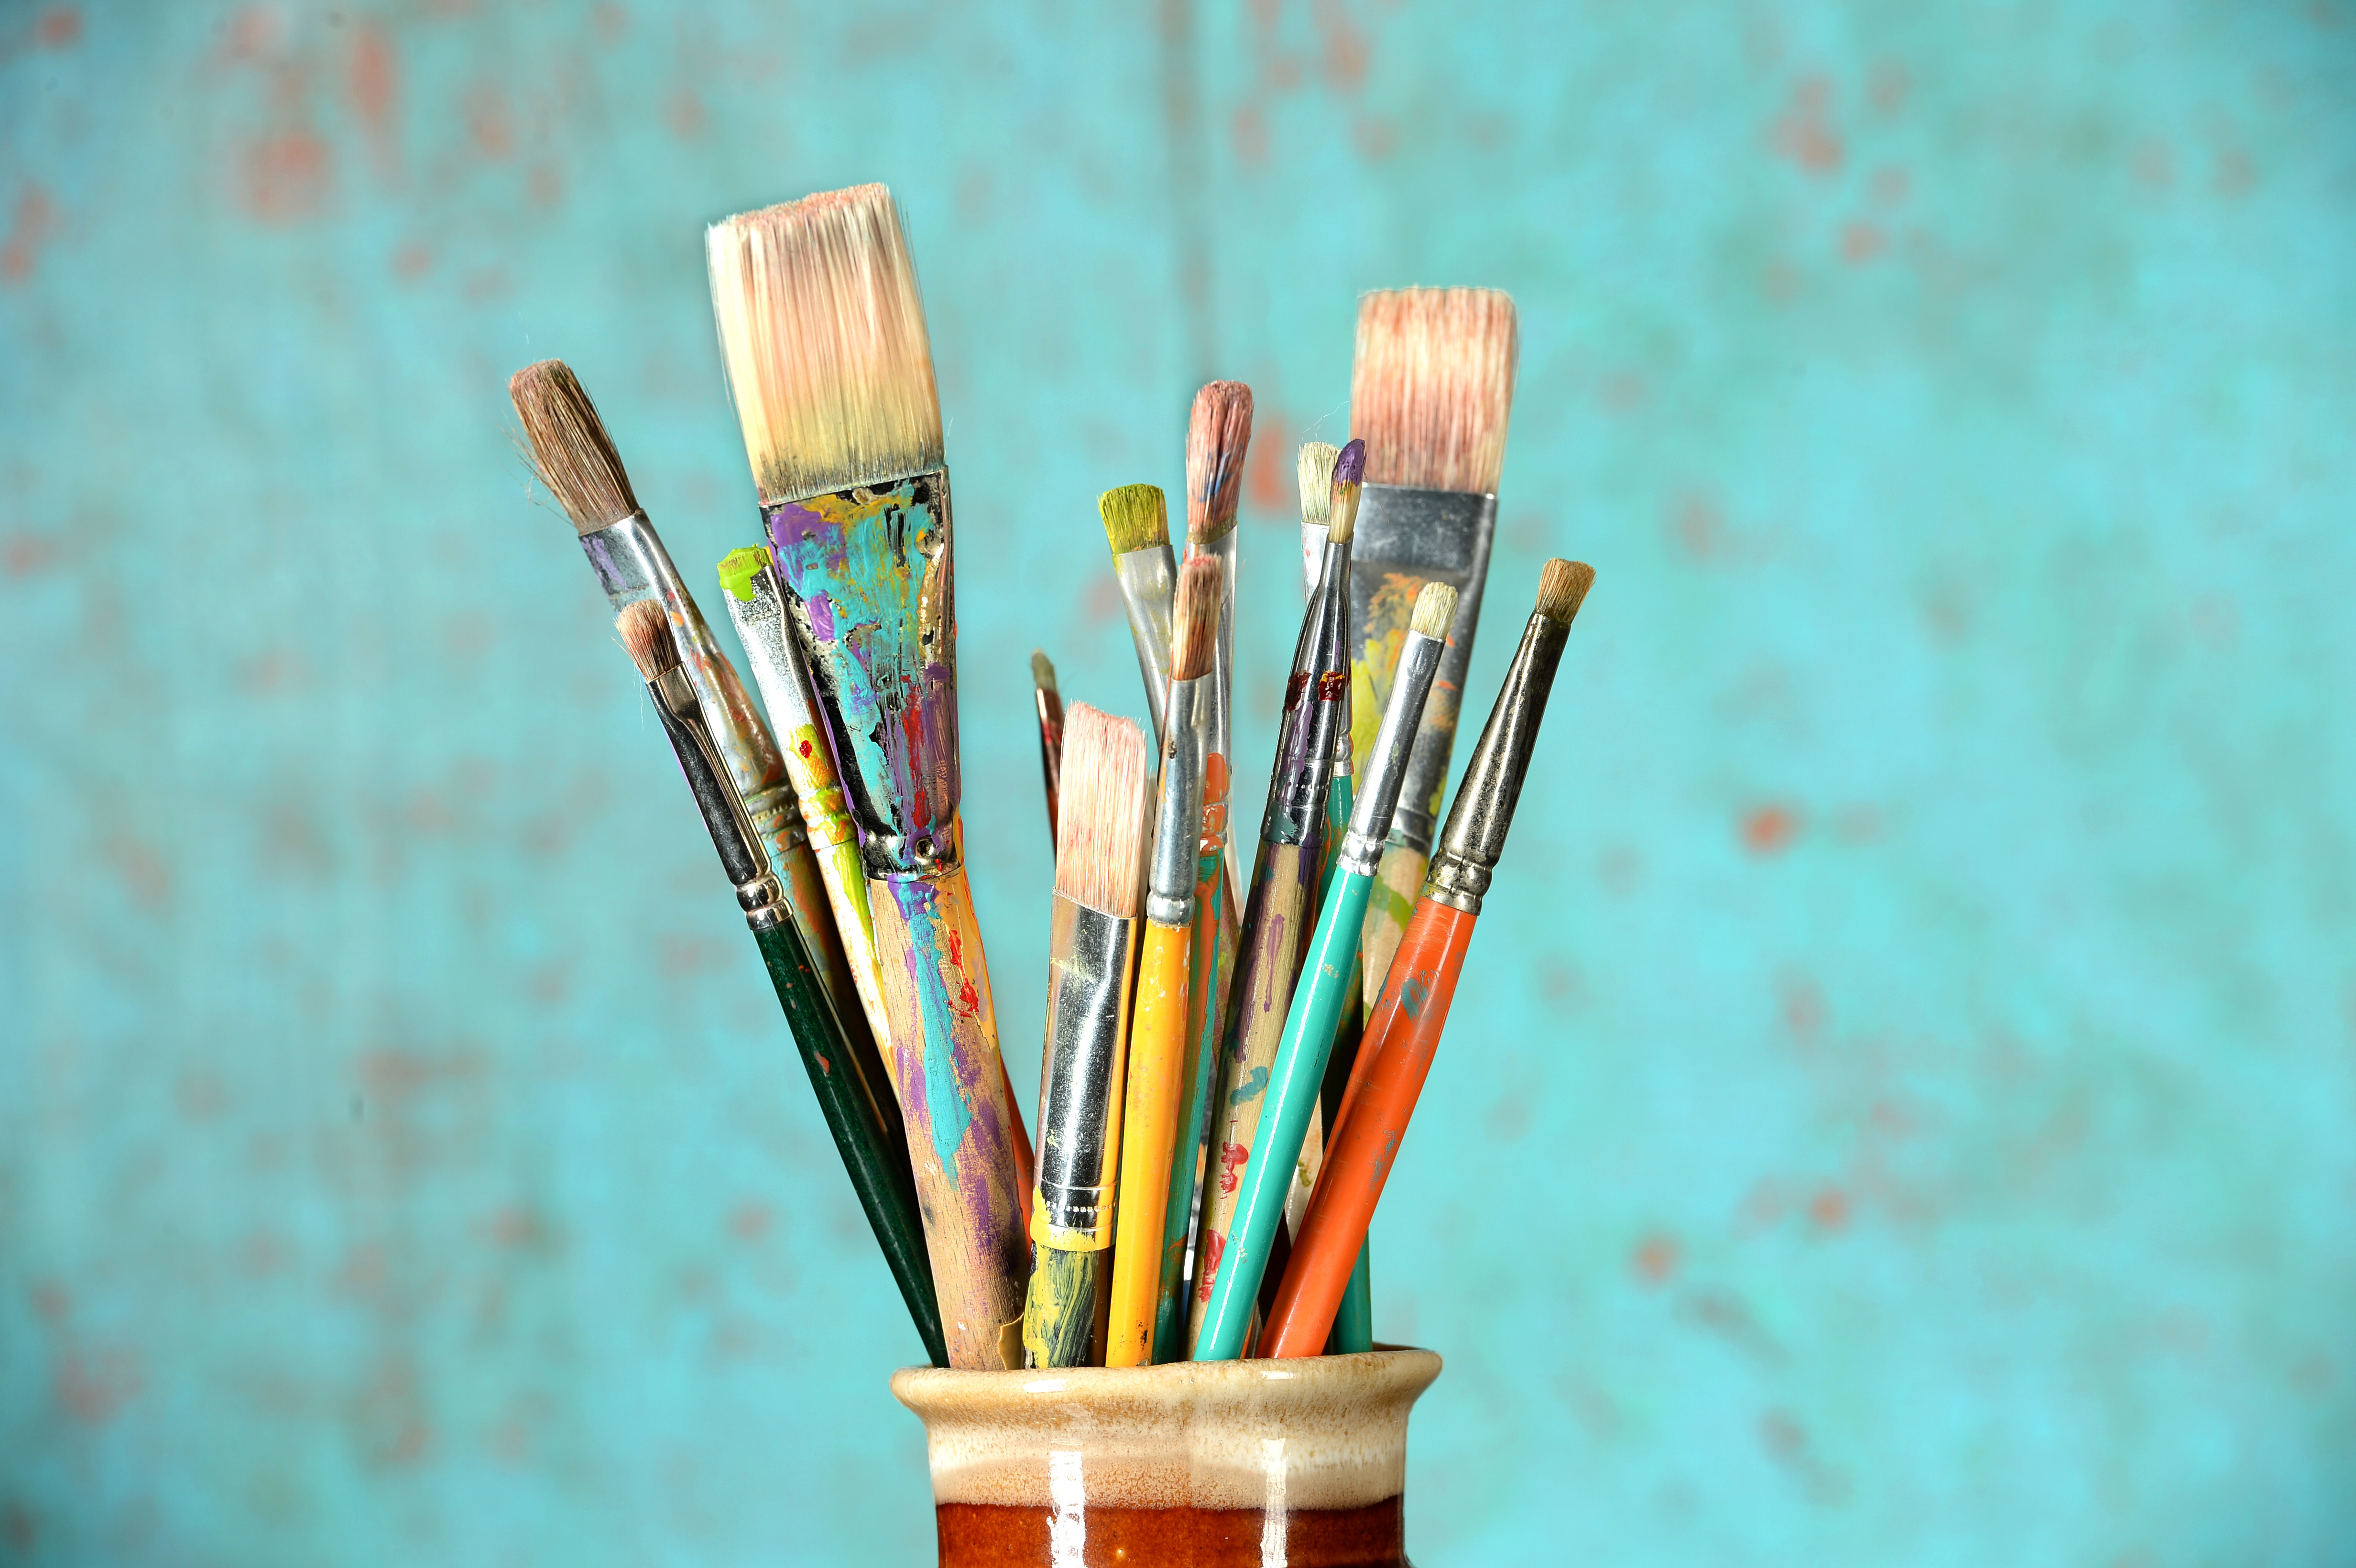 paintbrushes, covered with paint, stand against a blue background